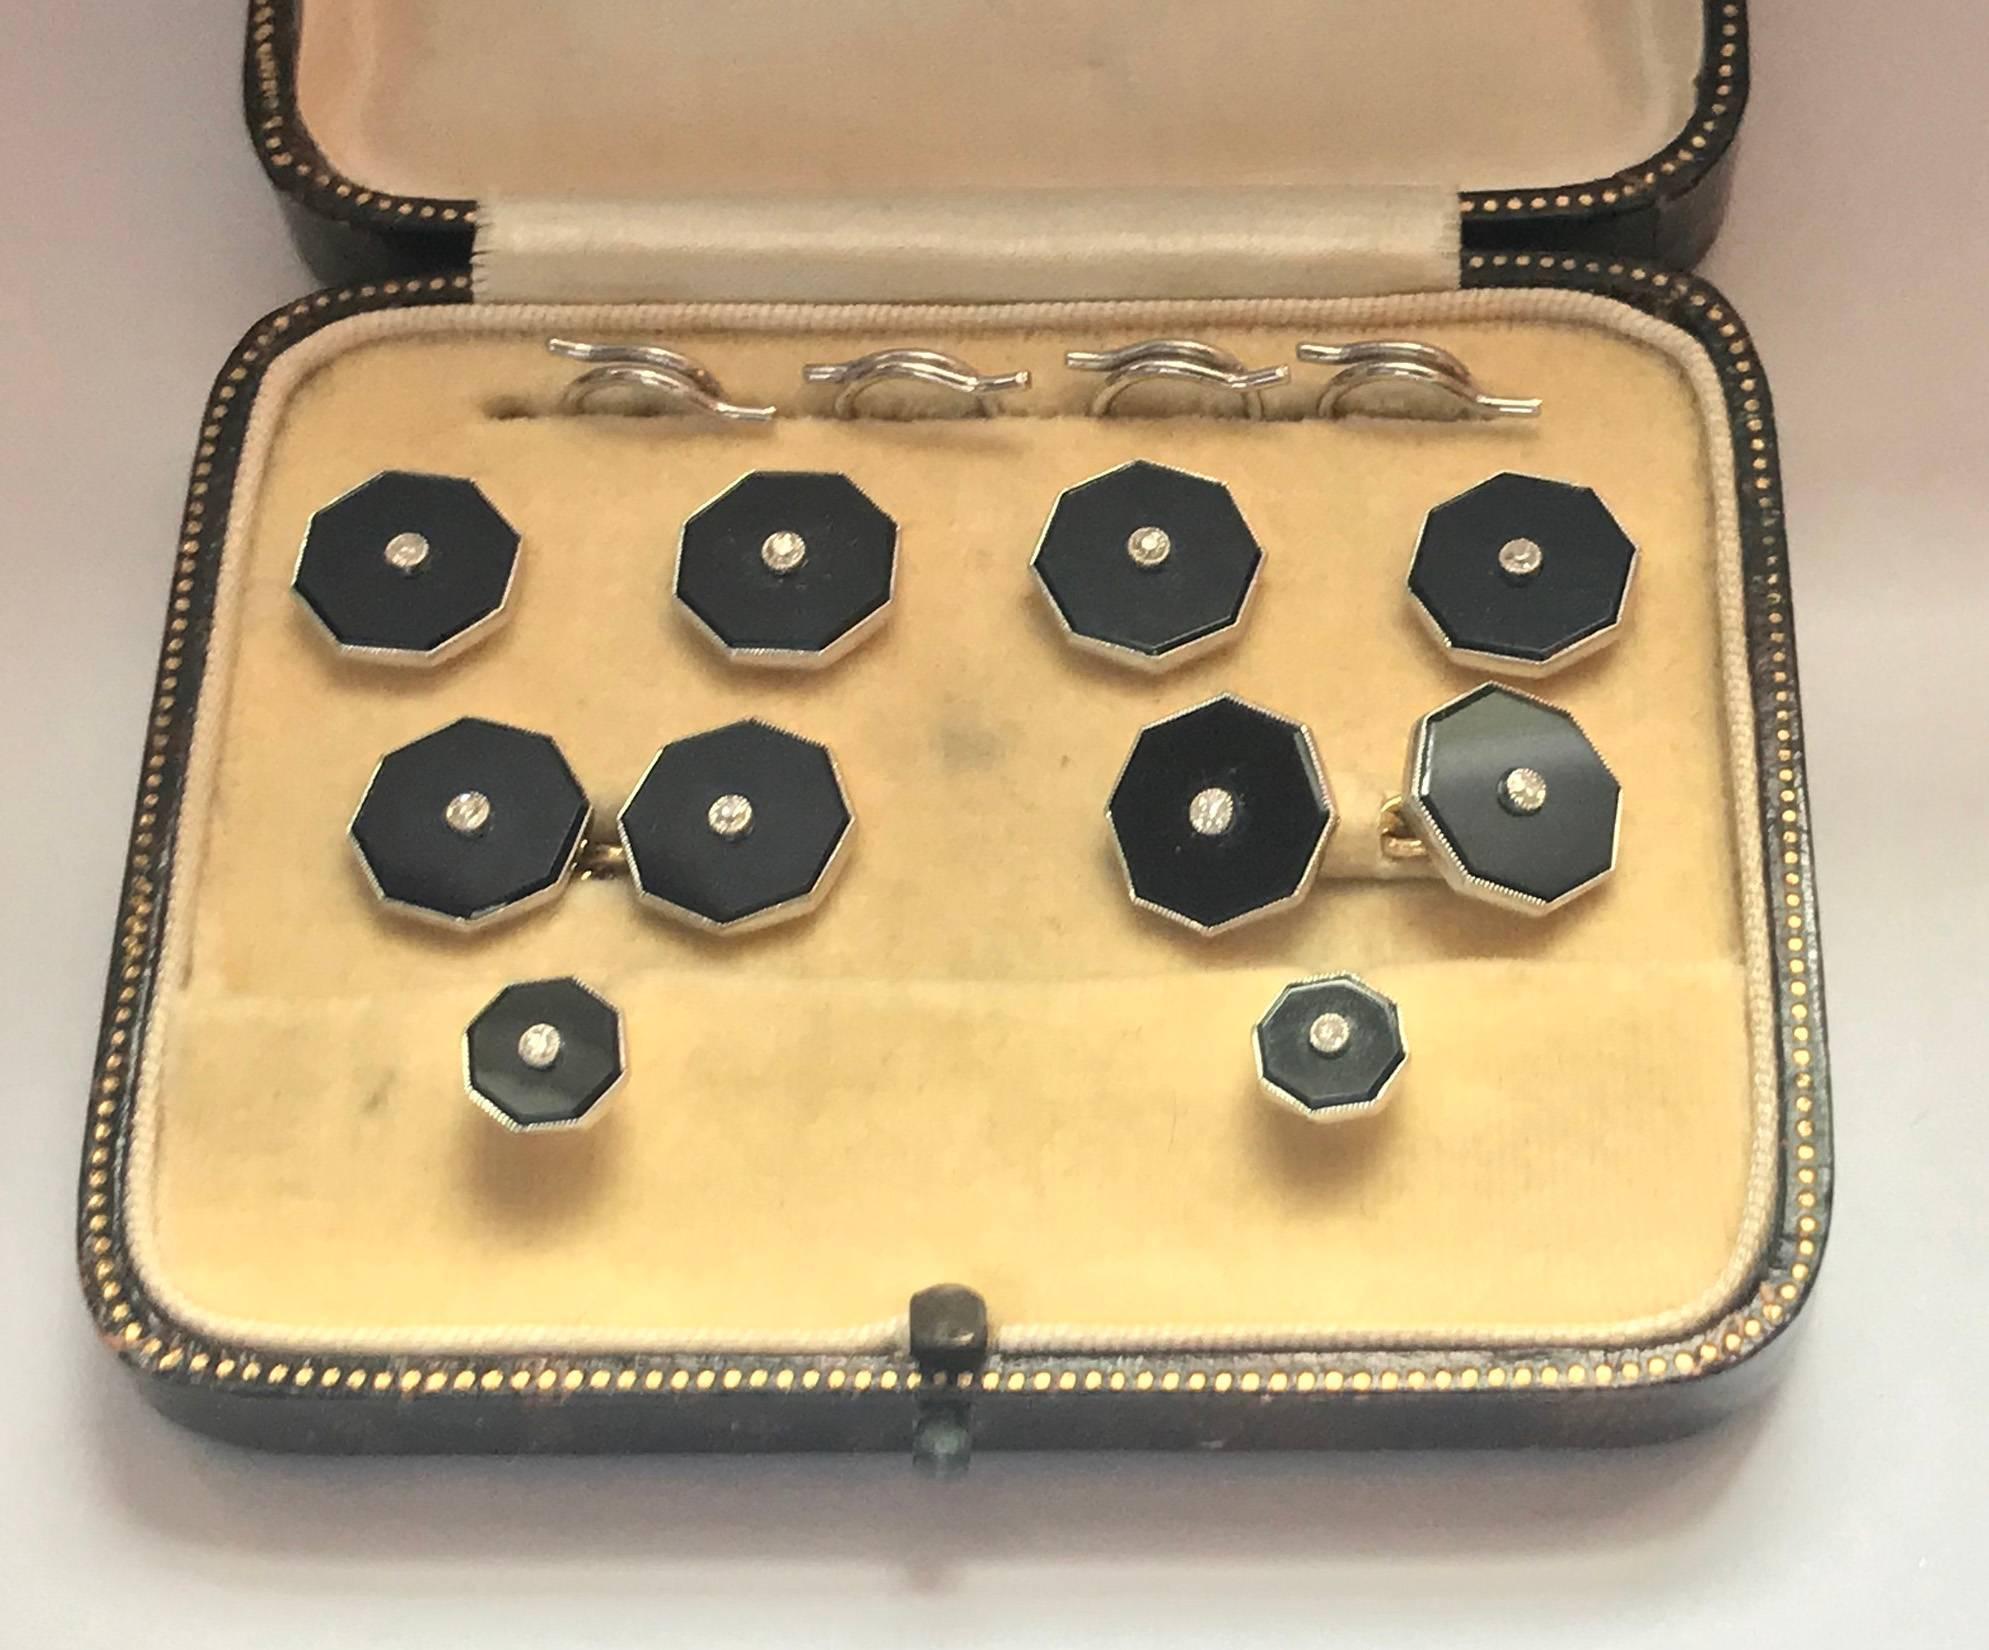 Set of 18K, Platinum, Onyx and Diamond gold Studs and links Tuxedo Set in fitted box, English C.1920. The studs of octagonal shape, each milligrain set in the center with a round faceted diamond and black onyx surround, the Cufflinks with chain link